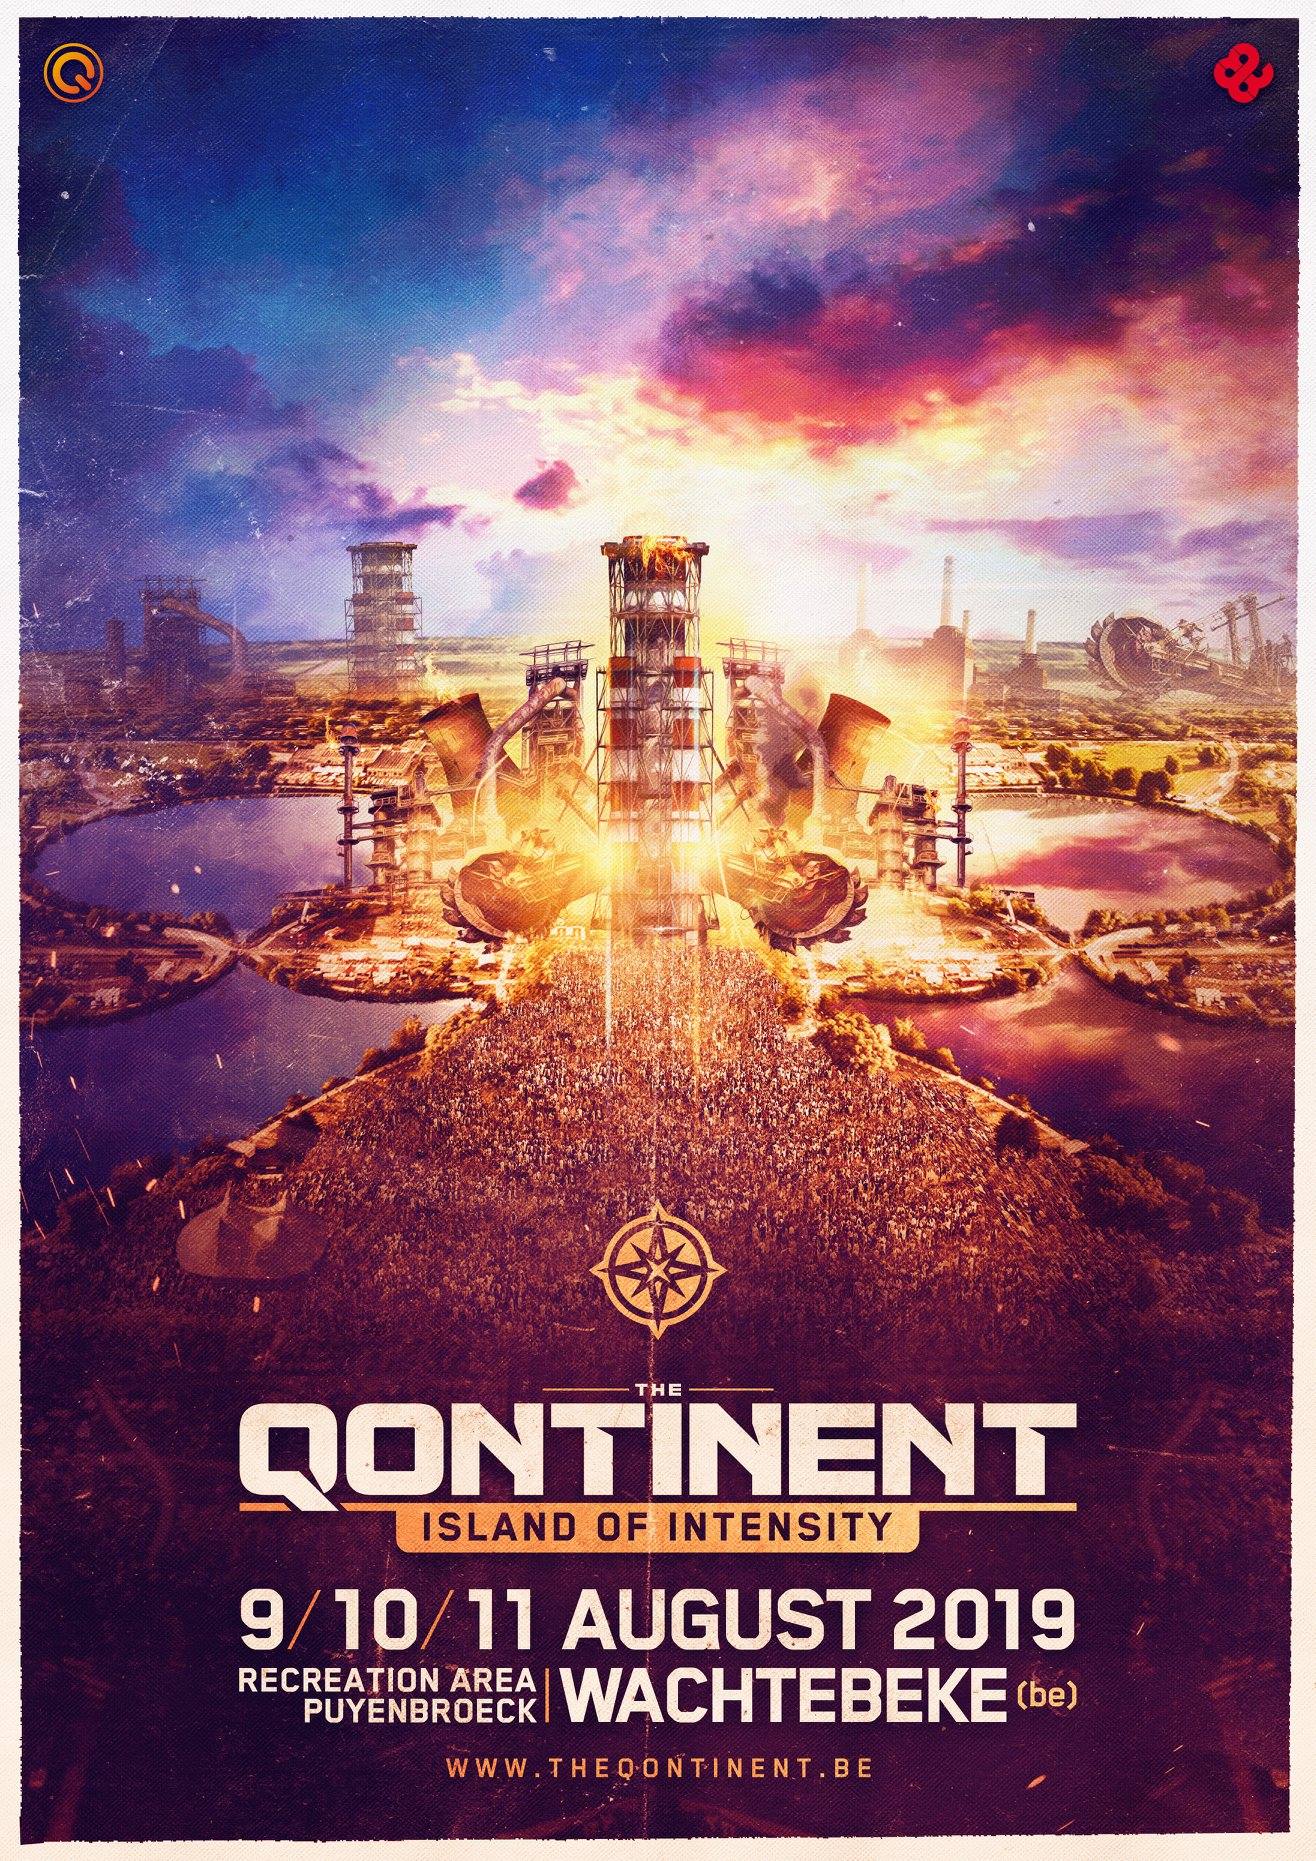 The Qontinent weekend 2019